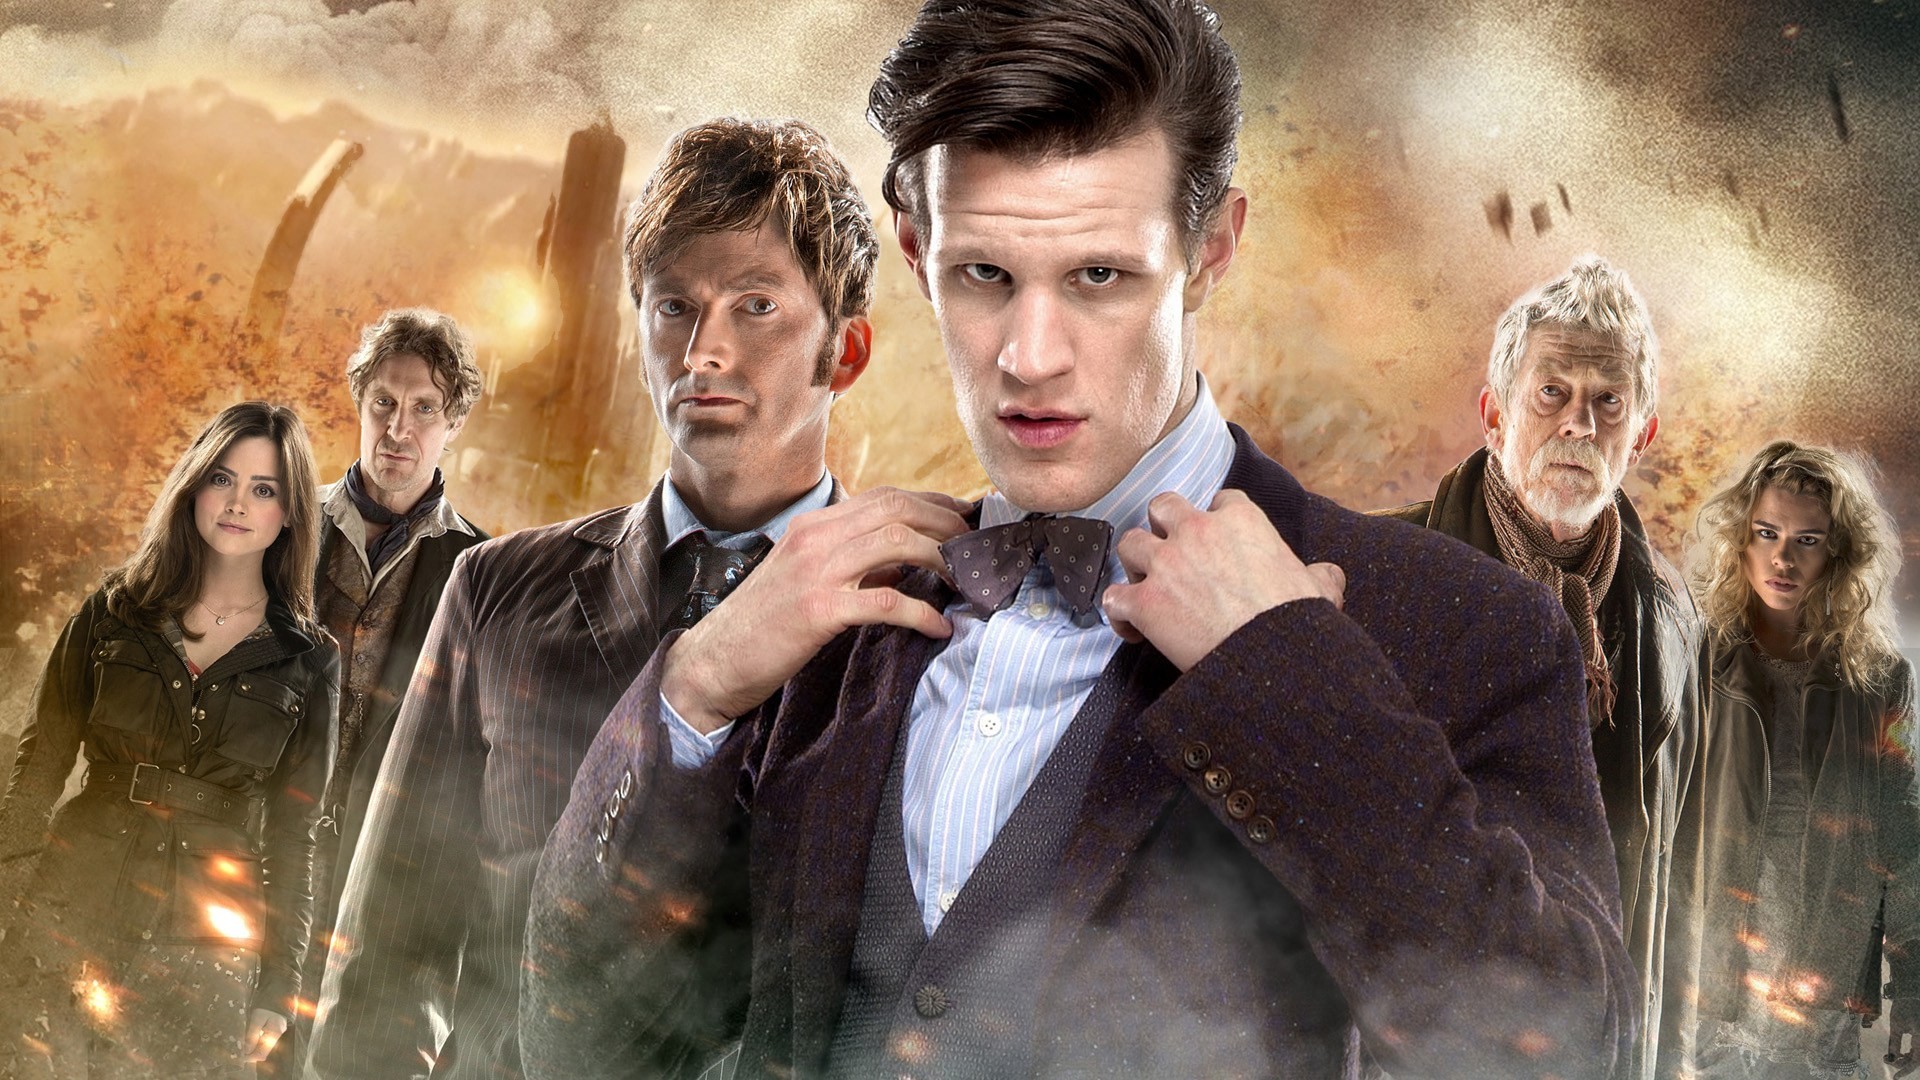 1920x1080 Tenth Doctor Eleventh Doctor Doctor Who 1080p HD Wallpaper Background